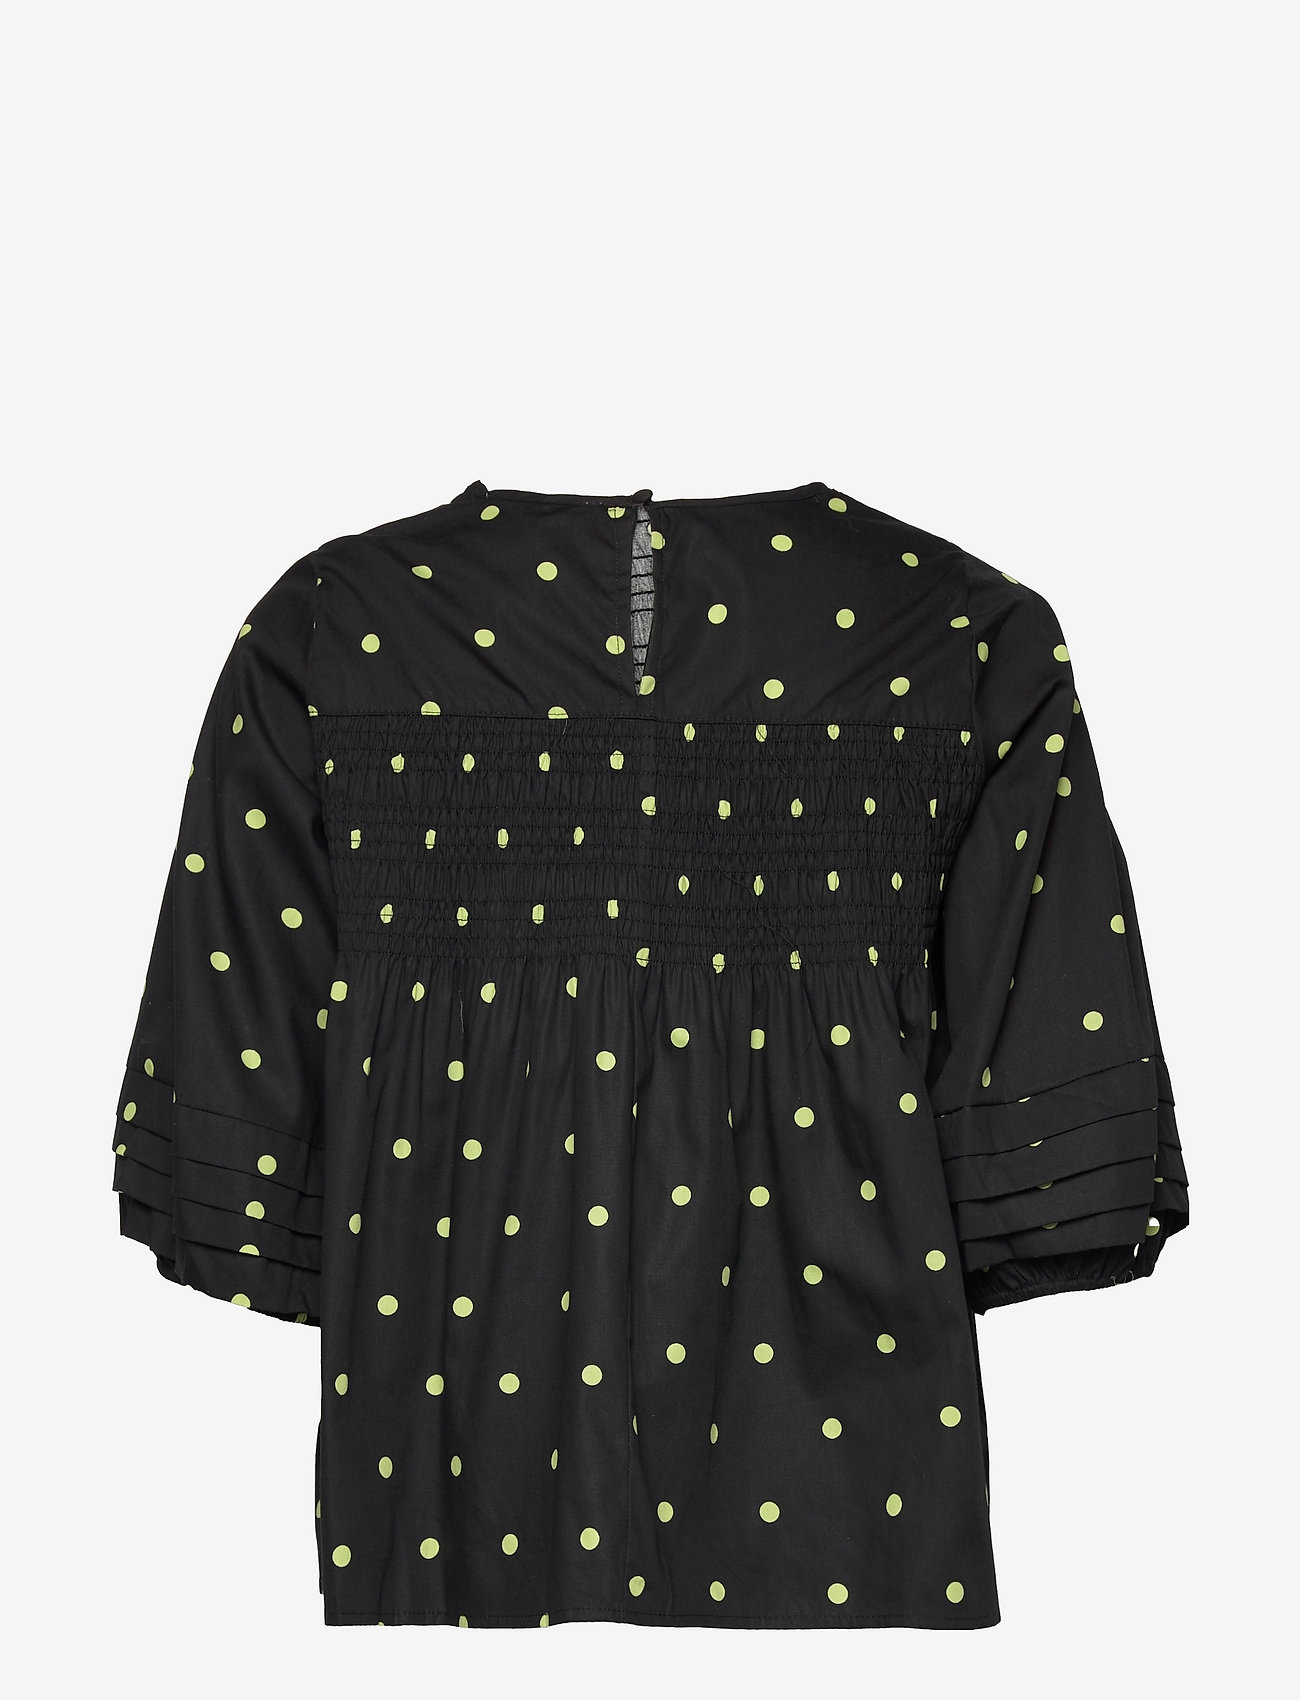 A-View - Sisse blouse - kortärmade blusar - black with green dots - 1